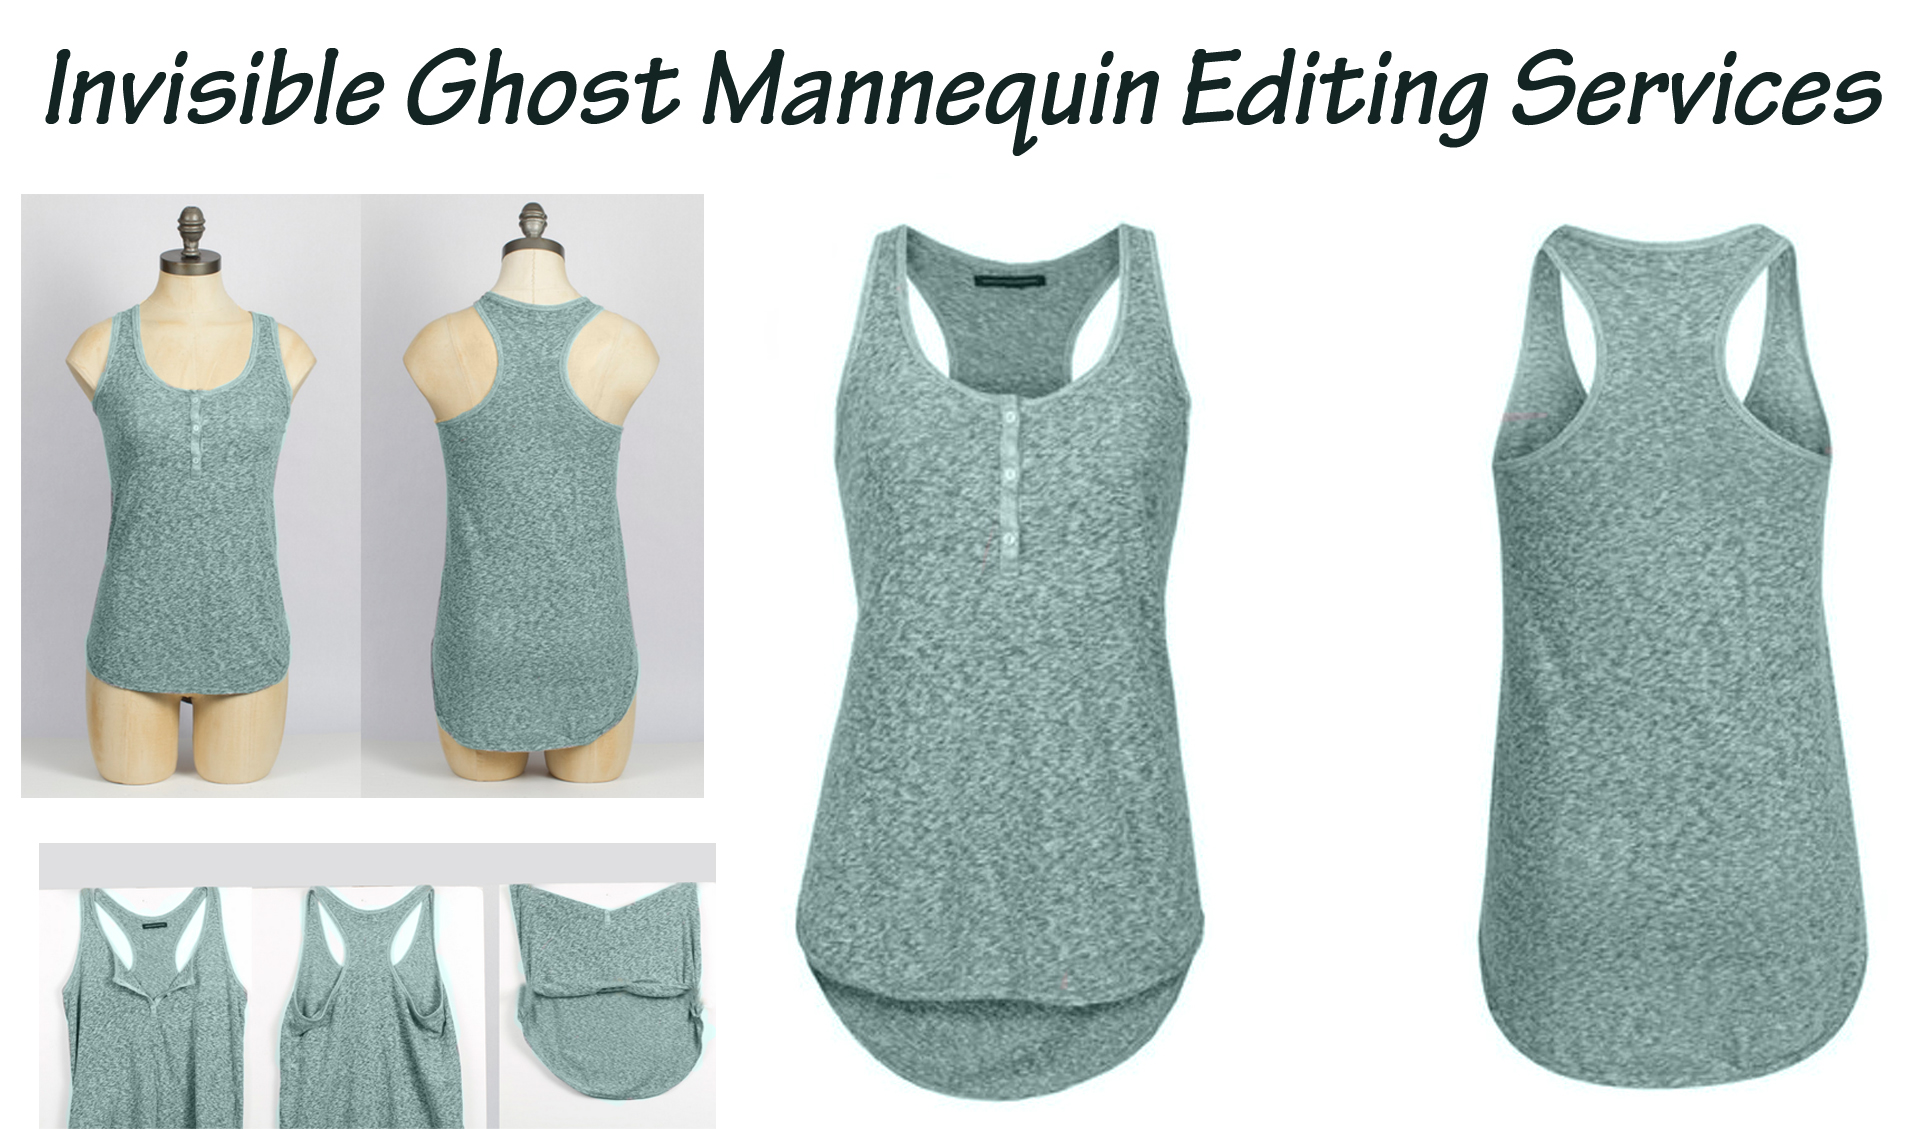 Invisible ghost mannequin photo editing services